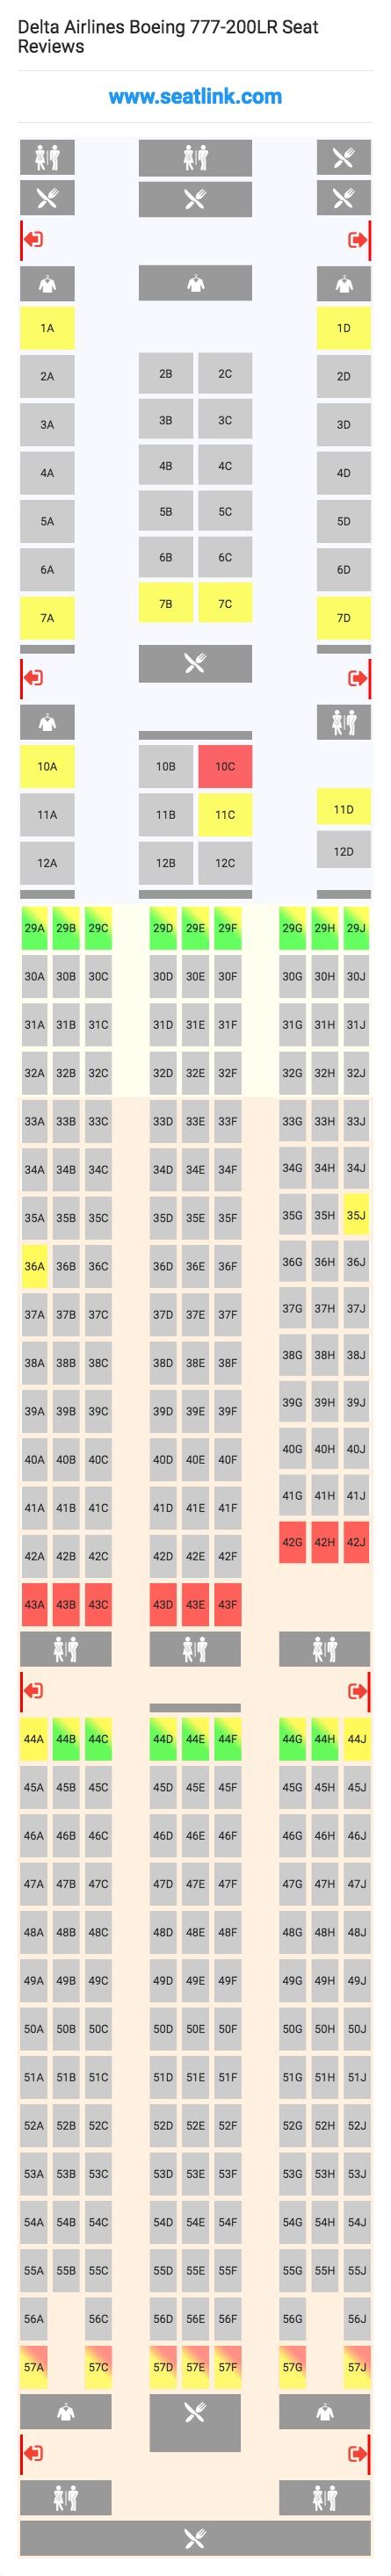 Seat Map Boeing Delta Airlines Best Seats In Plane Hot Sex